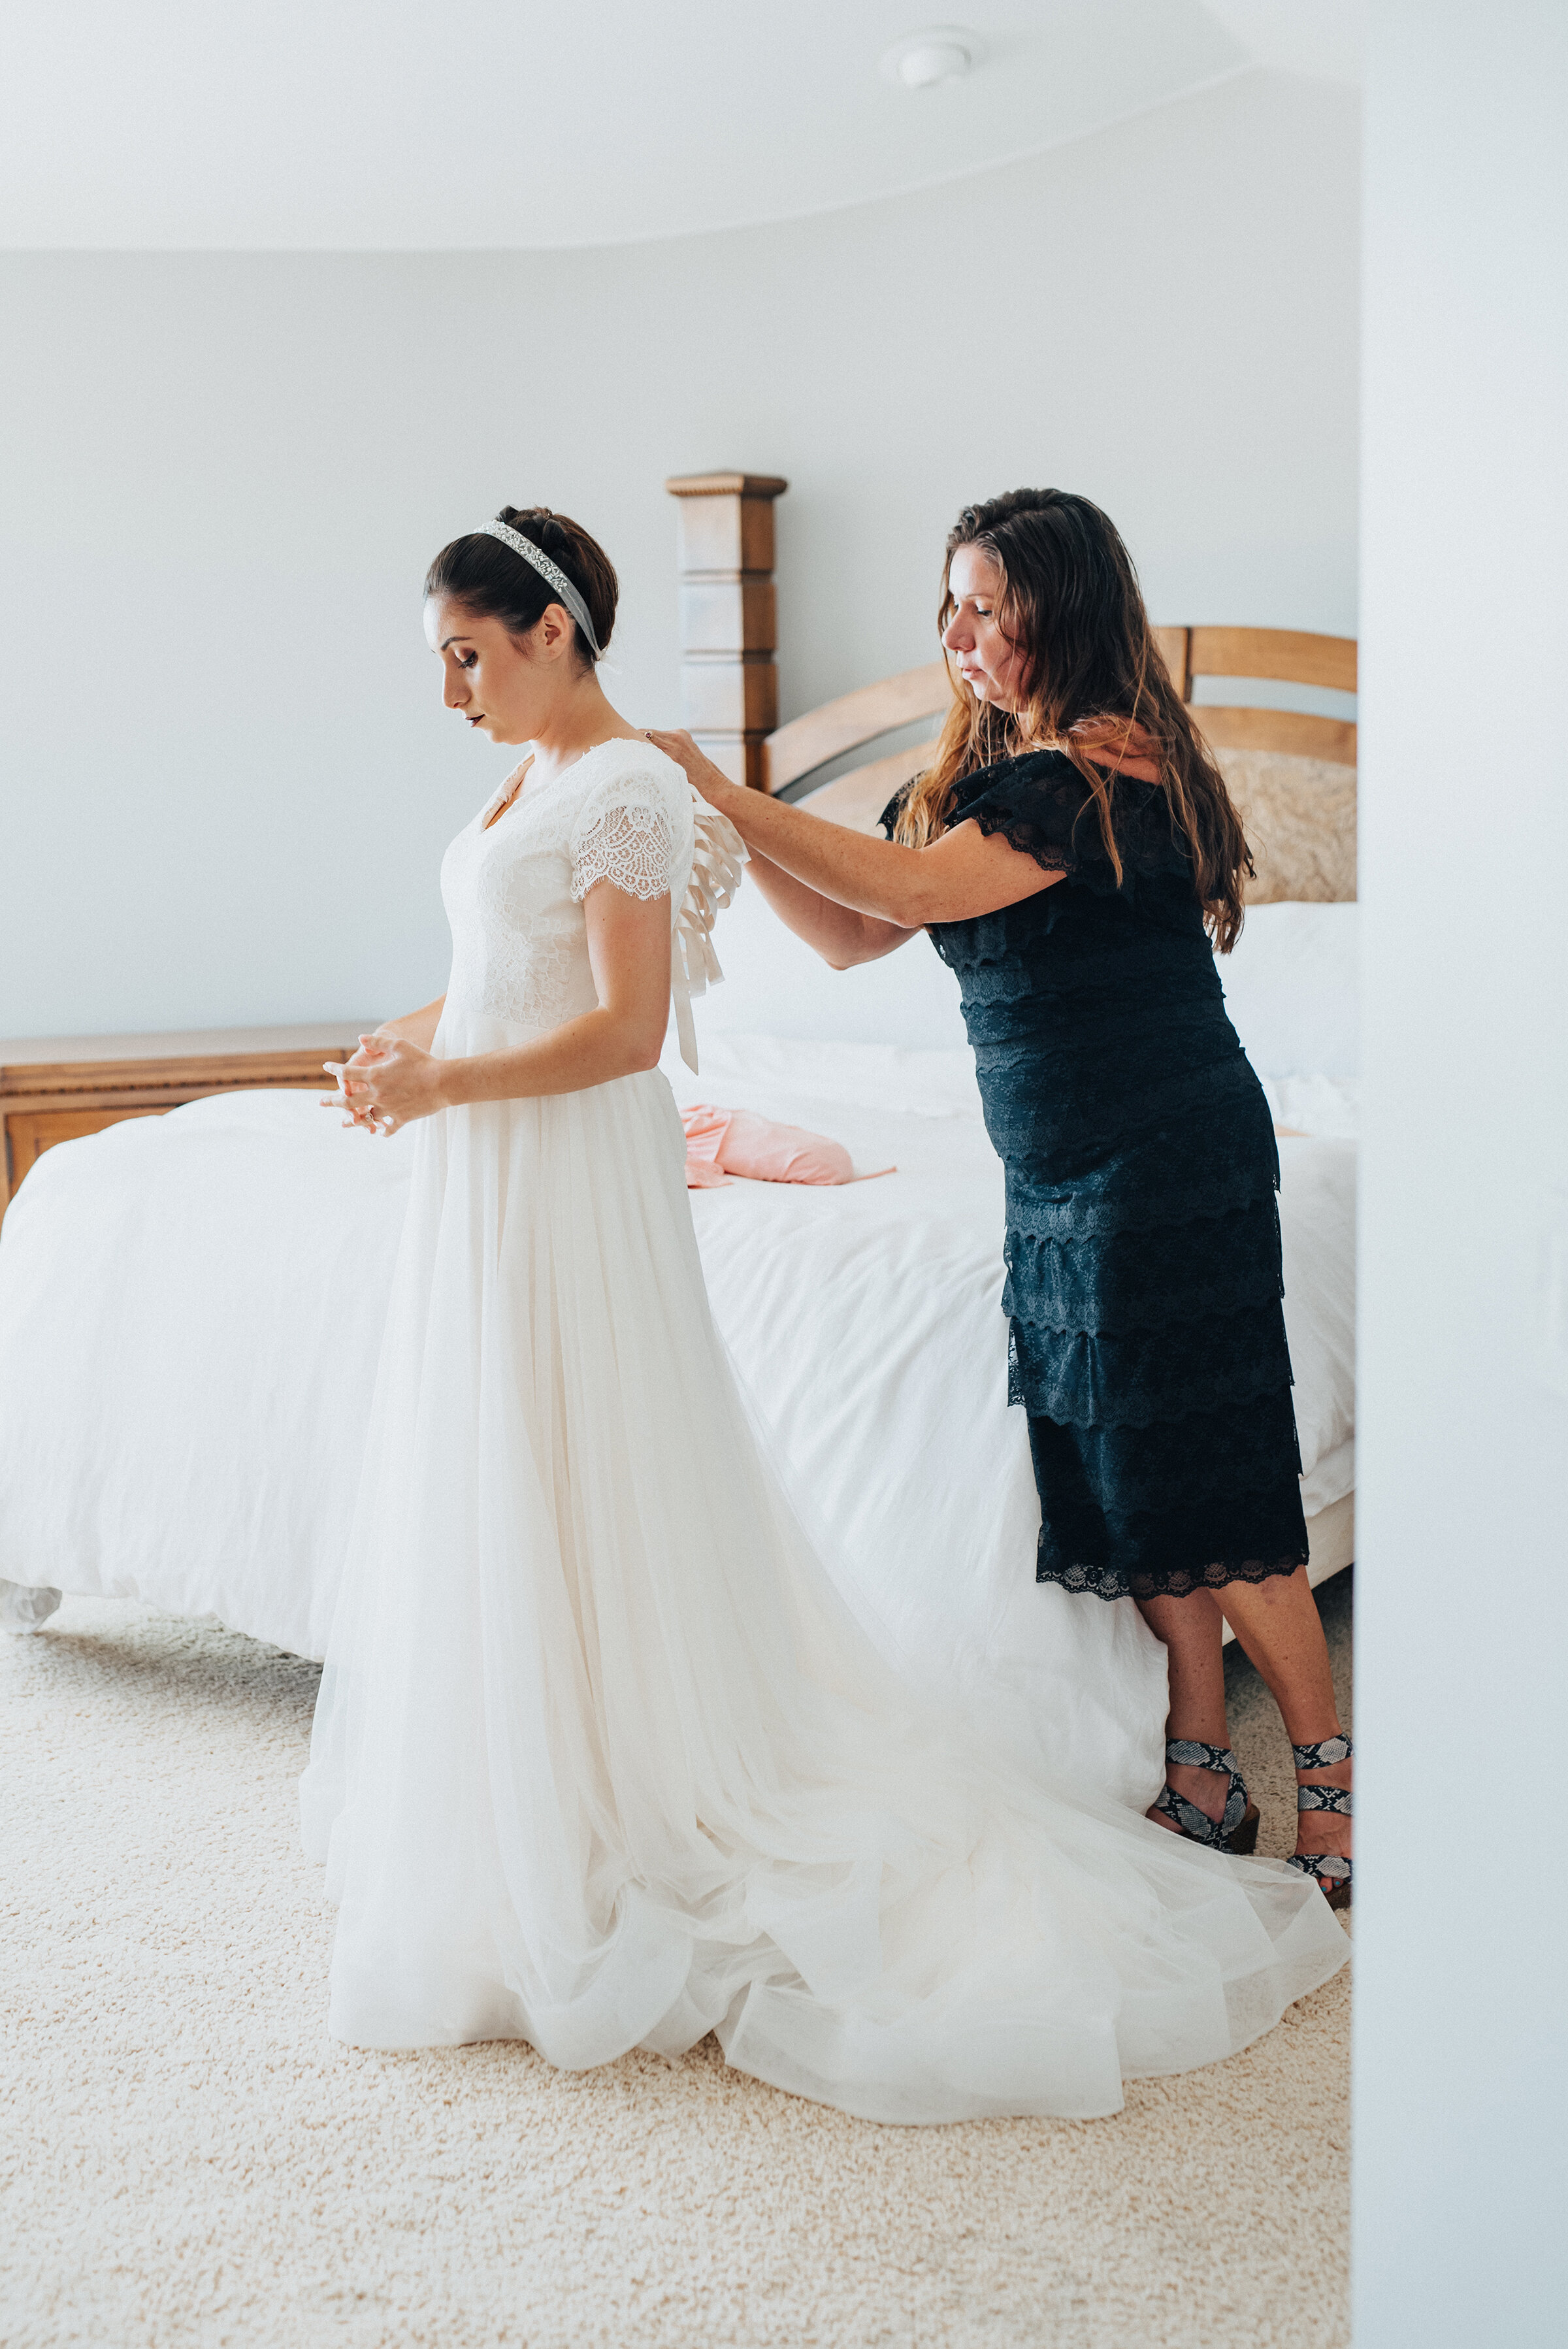  Mother of the bride helping her daughter get ready for her wedding day in Laguna Beach. Kristi Alyse photography Laguna Beach wedding California brides Logan Utah wedding photographer backyard wedding destination photographer covid wedding bride and groom #kristialysephotography #weddingphotography #Lagunabeach #destinationphotographer #weddingday #love #backyardwedding #loganutahphotographer #californiawedding #californiabrides 